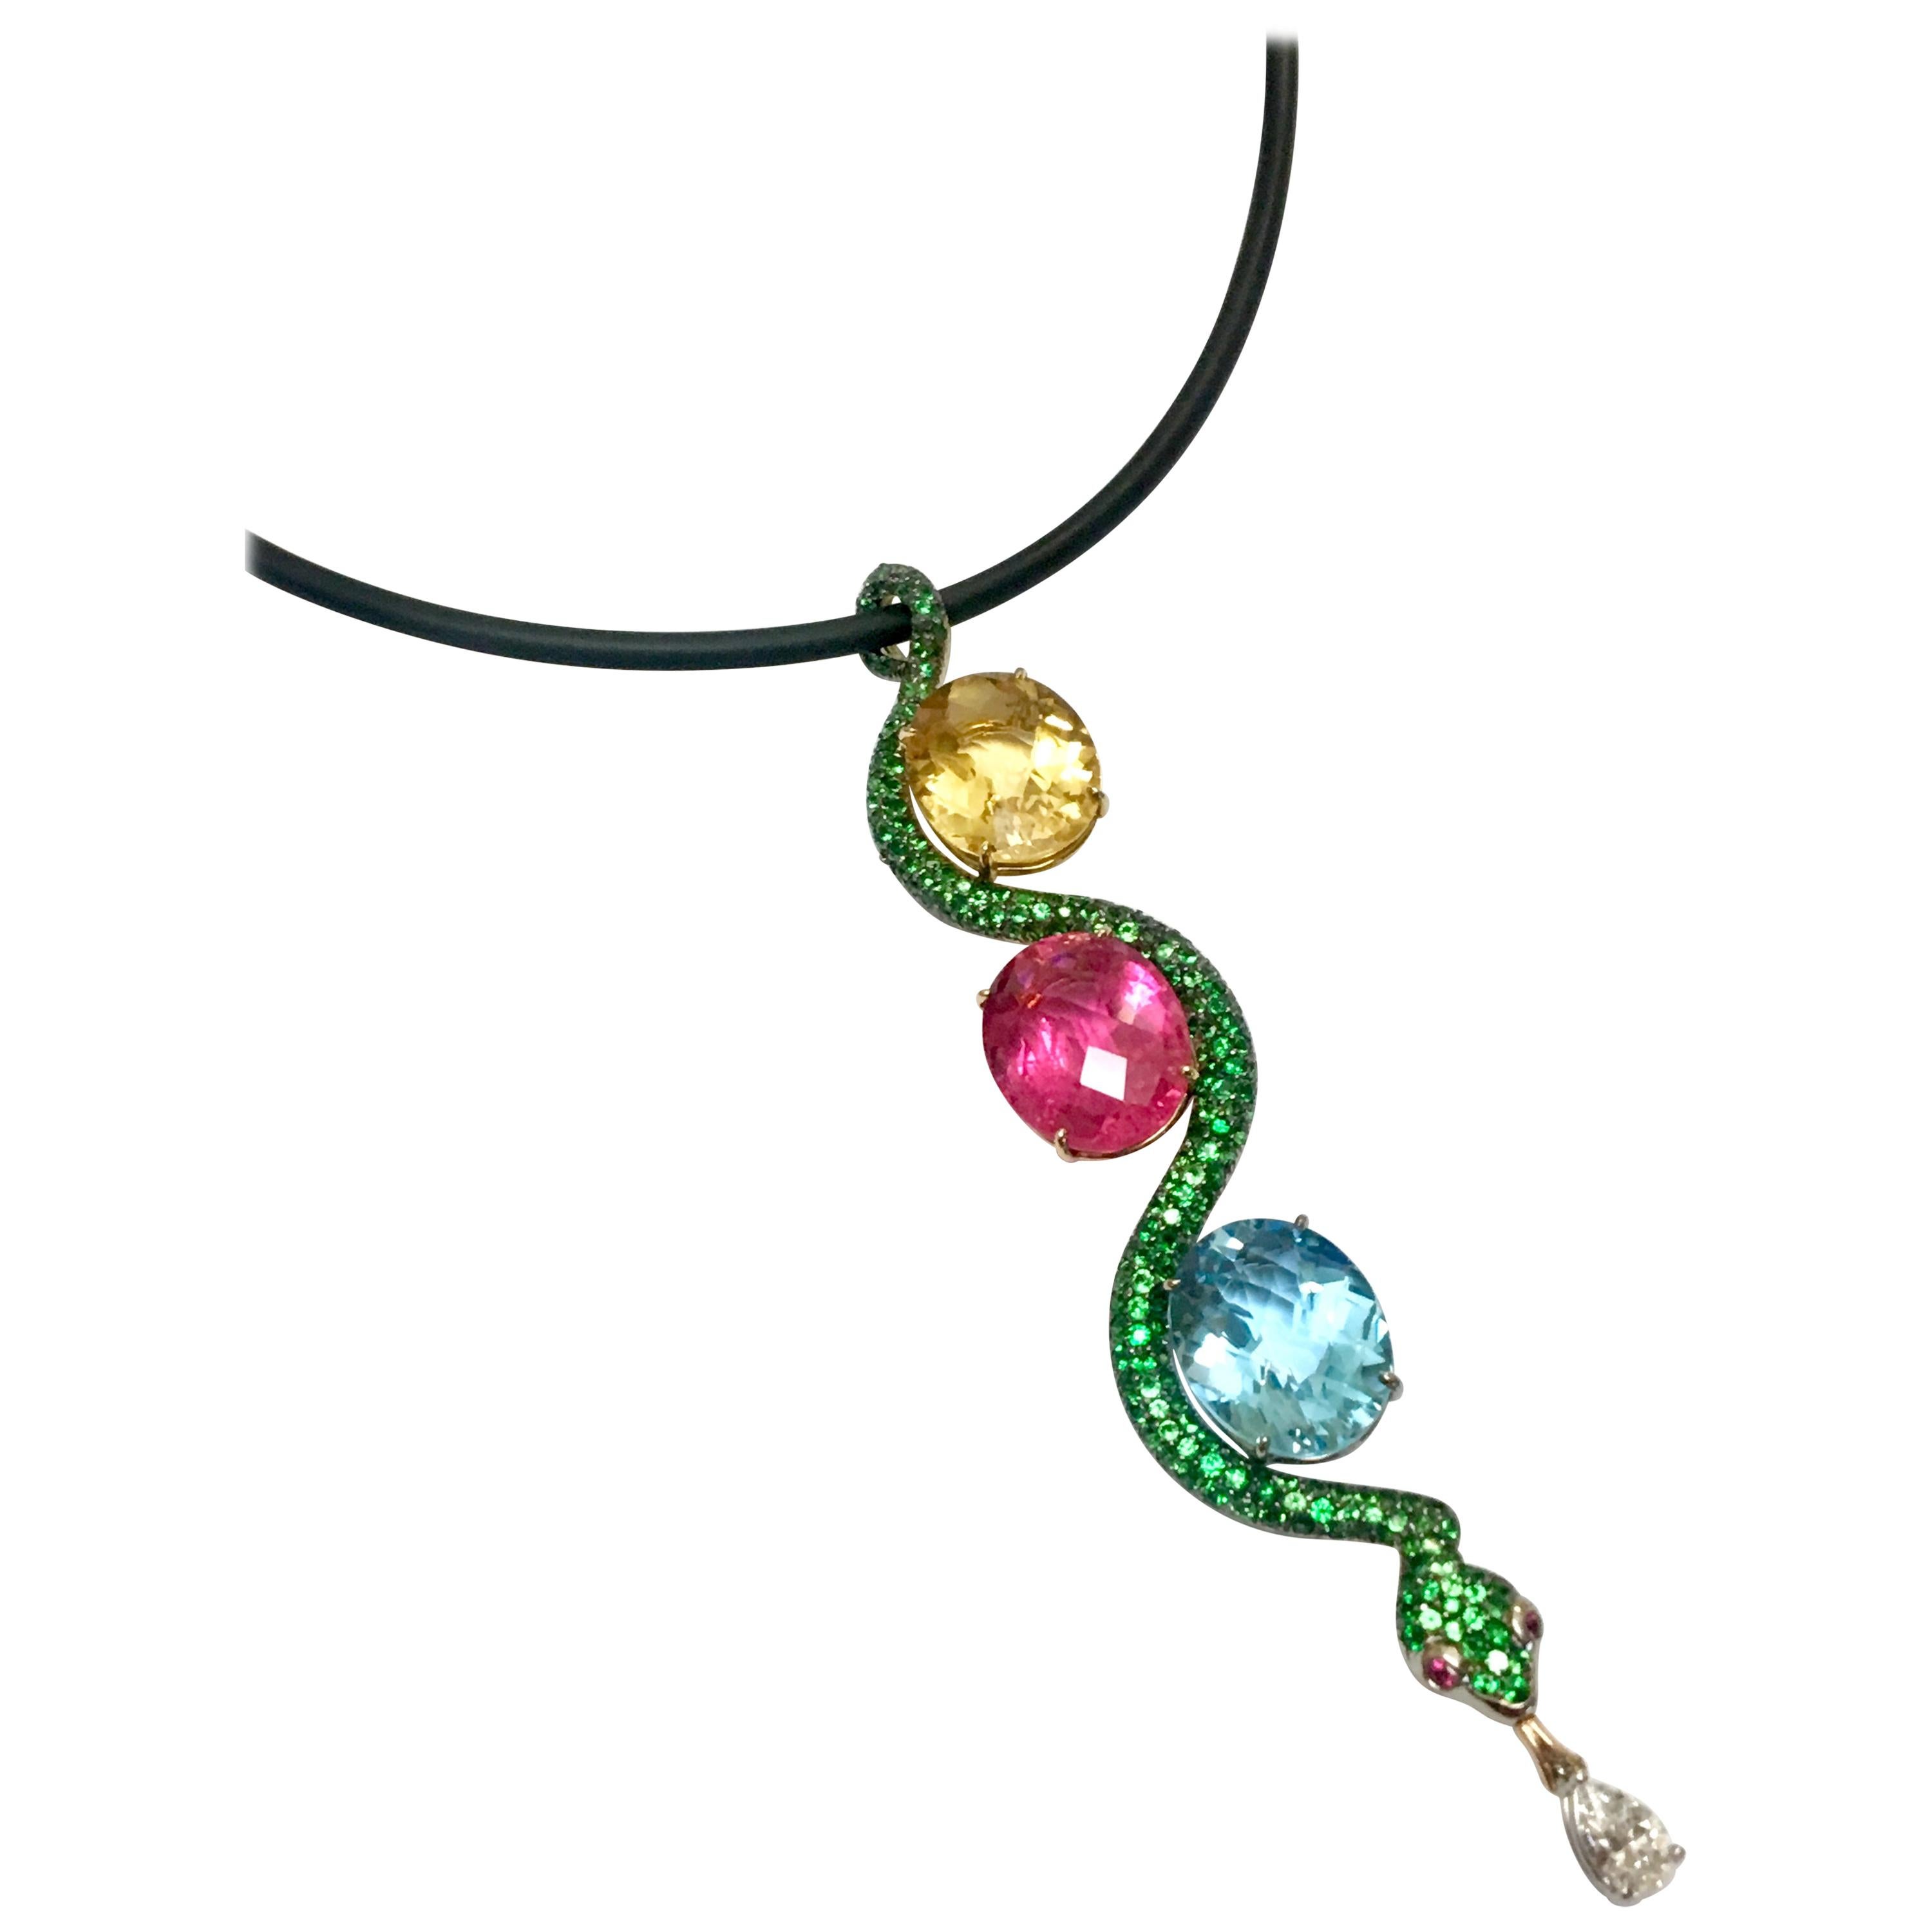 This exquisitely designed snake pendant uniquely combines a 9.28ct. Citrine, a 11.49 ct Rubellite and a 12.60 ct. Blue Topaz, all of gem quality, with 2.57 carats of Tsavorite garnet pave and a .46 carat diamond dangling. It is hanging on a black